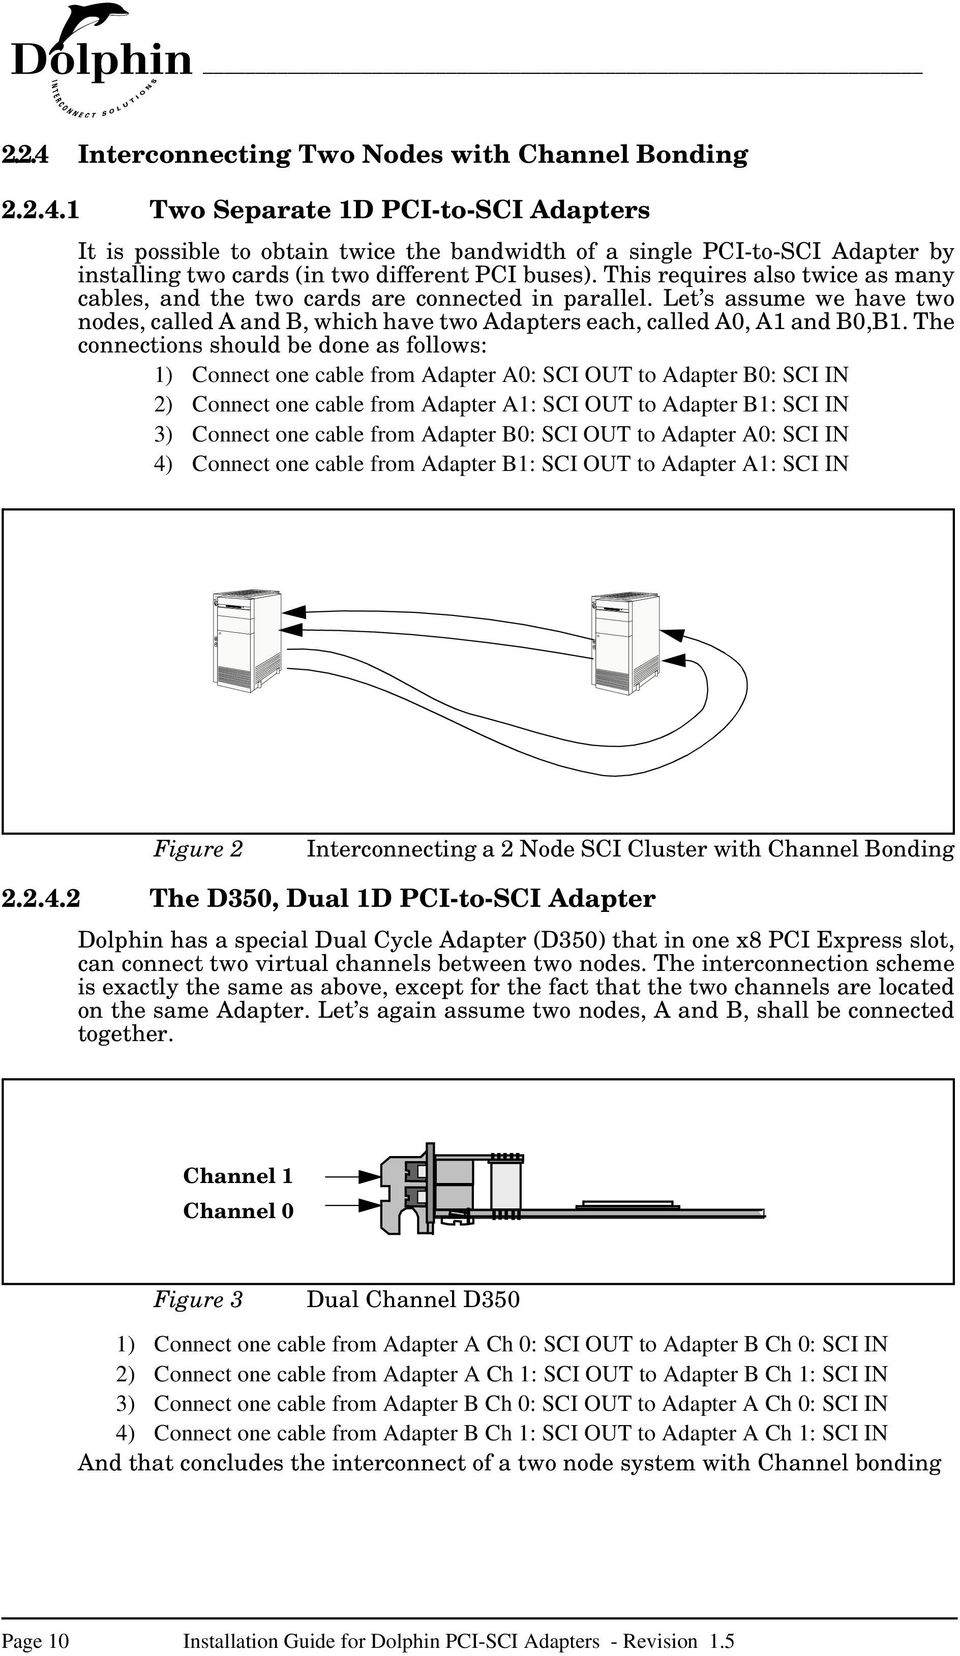 The connections should be done as follows: 1) Connect one cable from Adapter A0: SCI to Adapter B0: SCI 2) Connect one cable from Adapter A1: SCI to Adapter B1: SCI 3) Connect one cable from Adapter